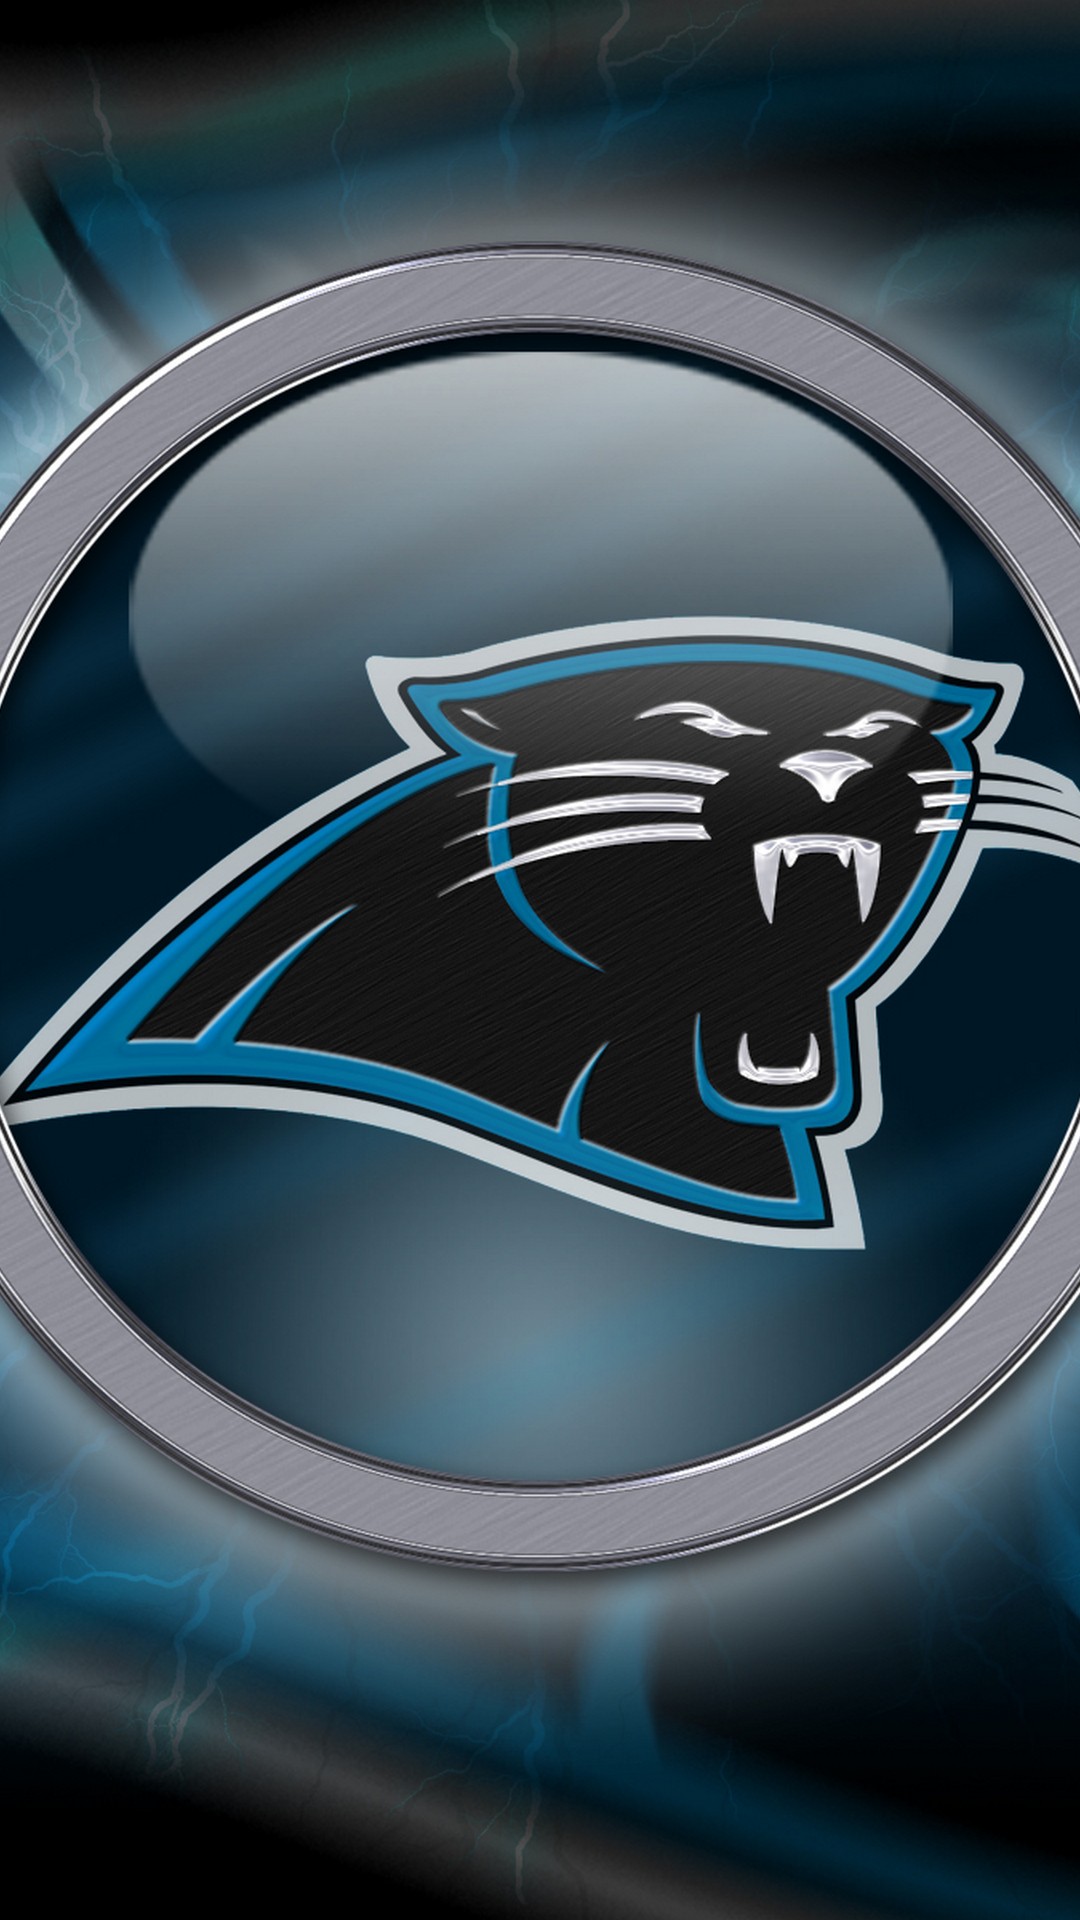 Carolina Panthers iPhone Wallpaper with high-resolution 1080x1920 pixel. Download and set as wallpaper for Apple iPhone X, XS Max, XR, 8, 7, 6, SE, iPad, Android